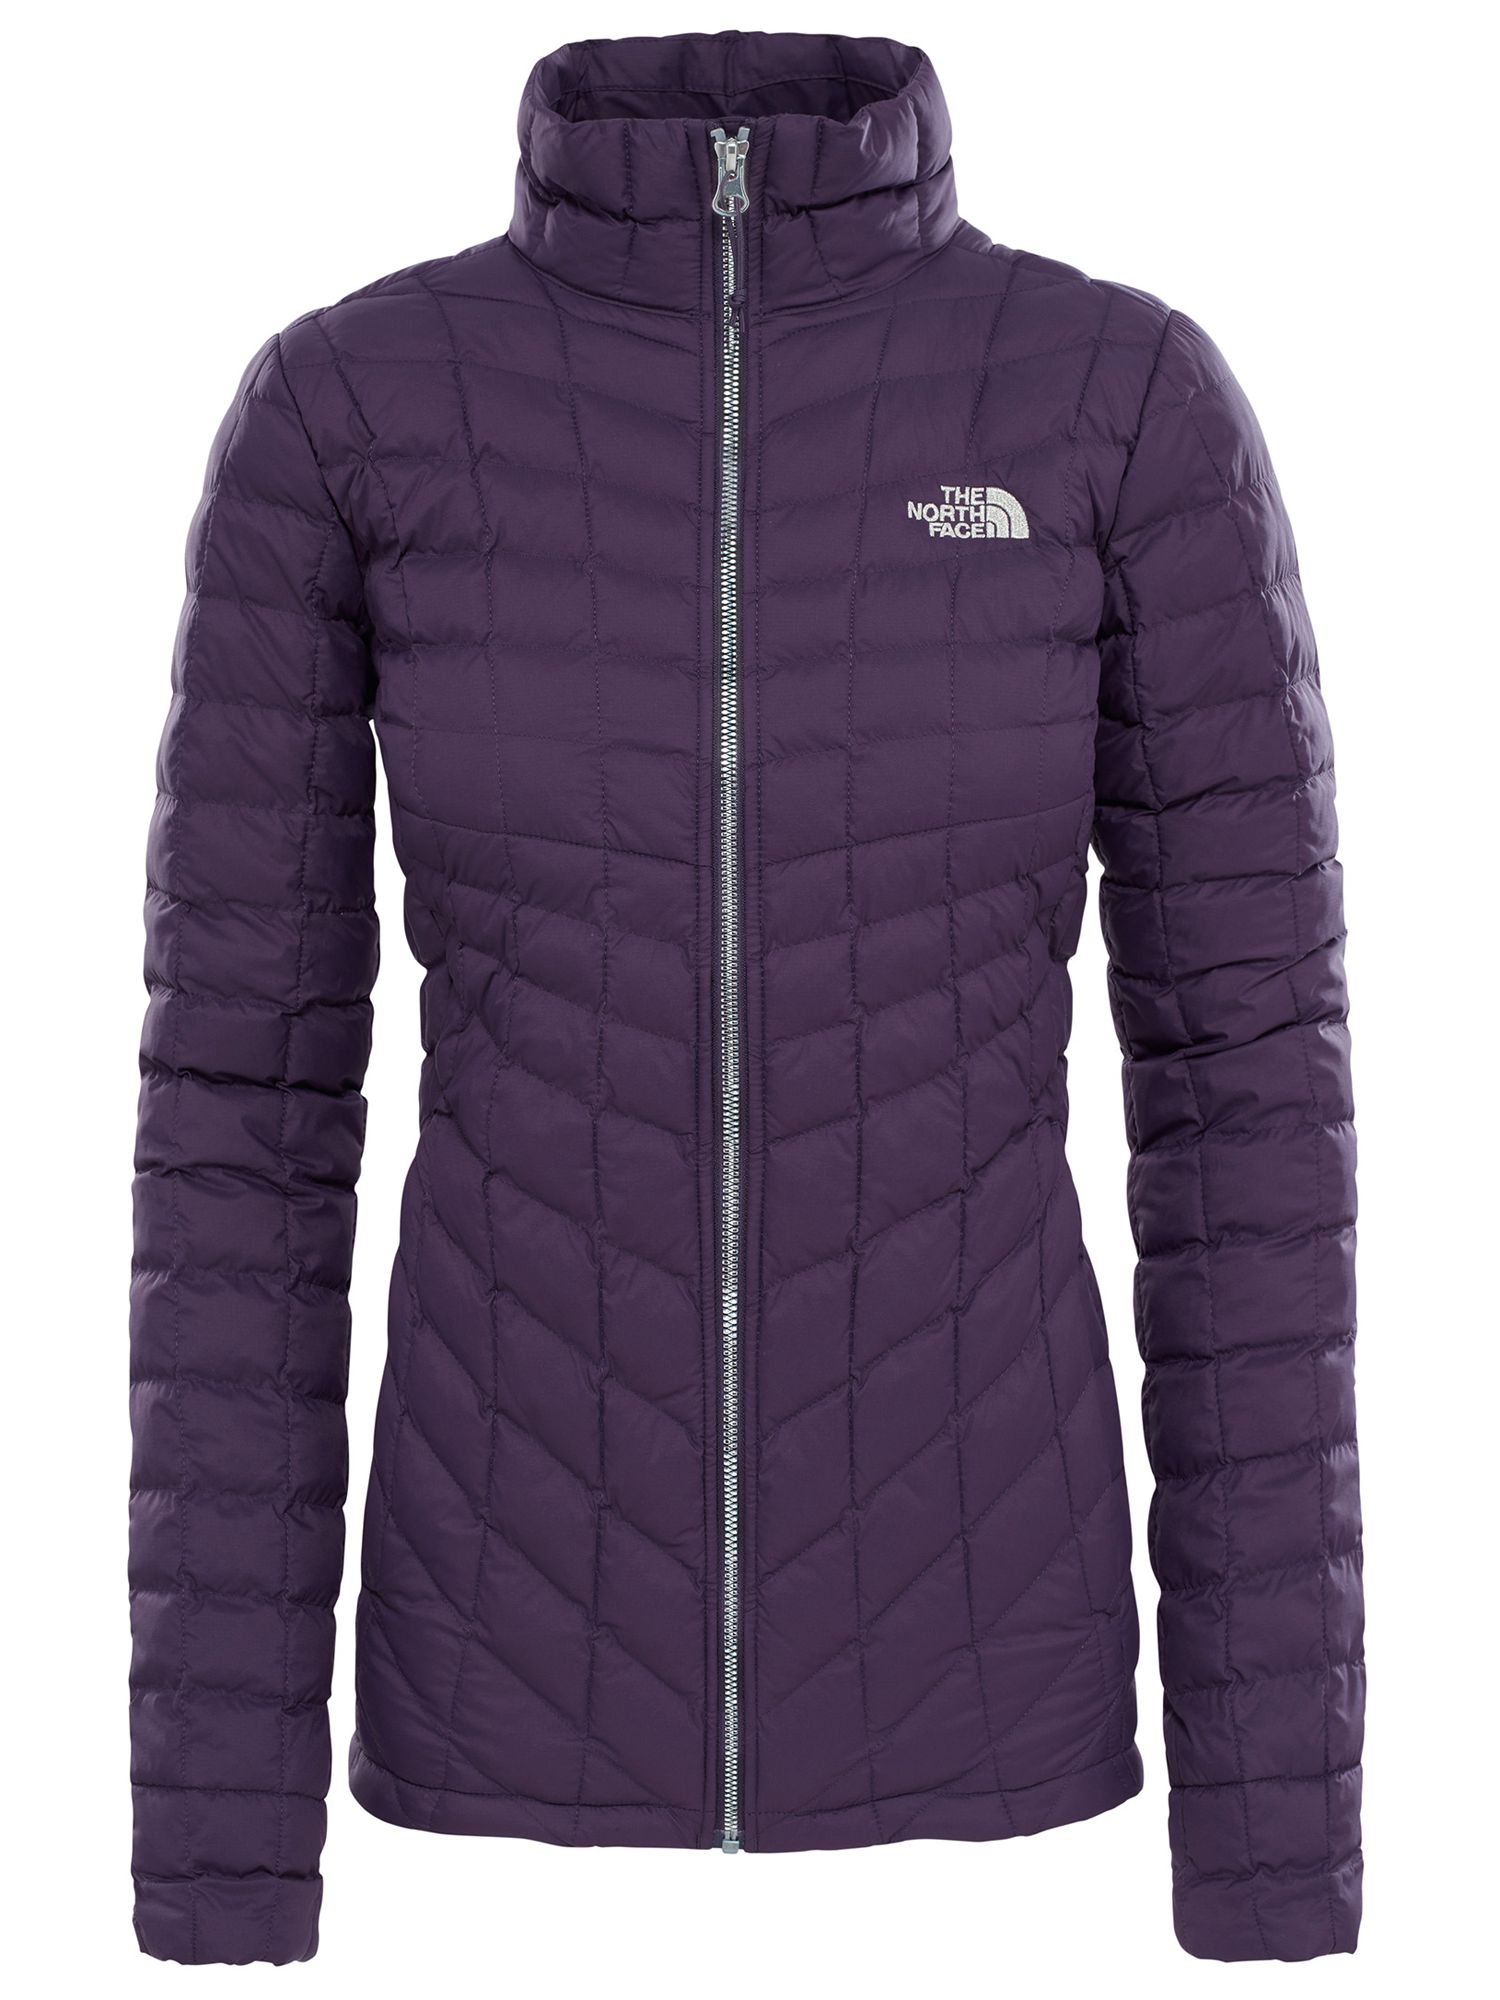 The North Face Thermoball Zip-In Women's Insulated Jacket, Purple, M